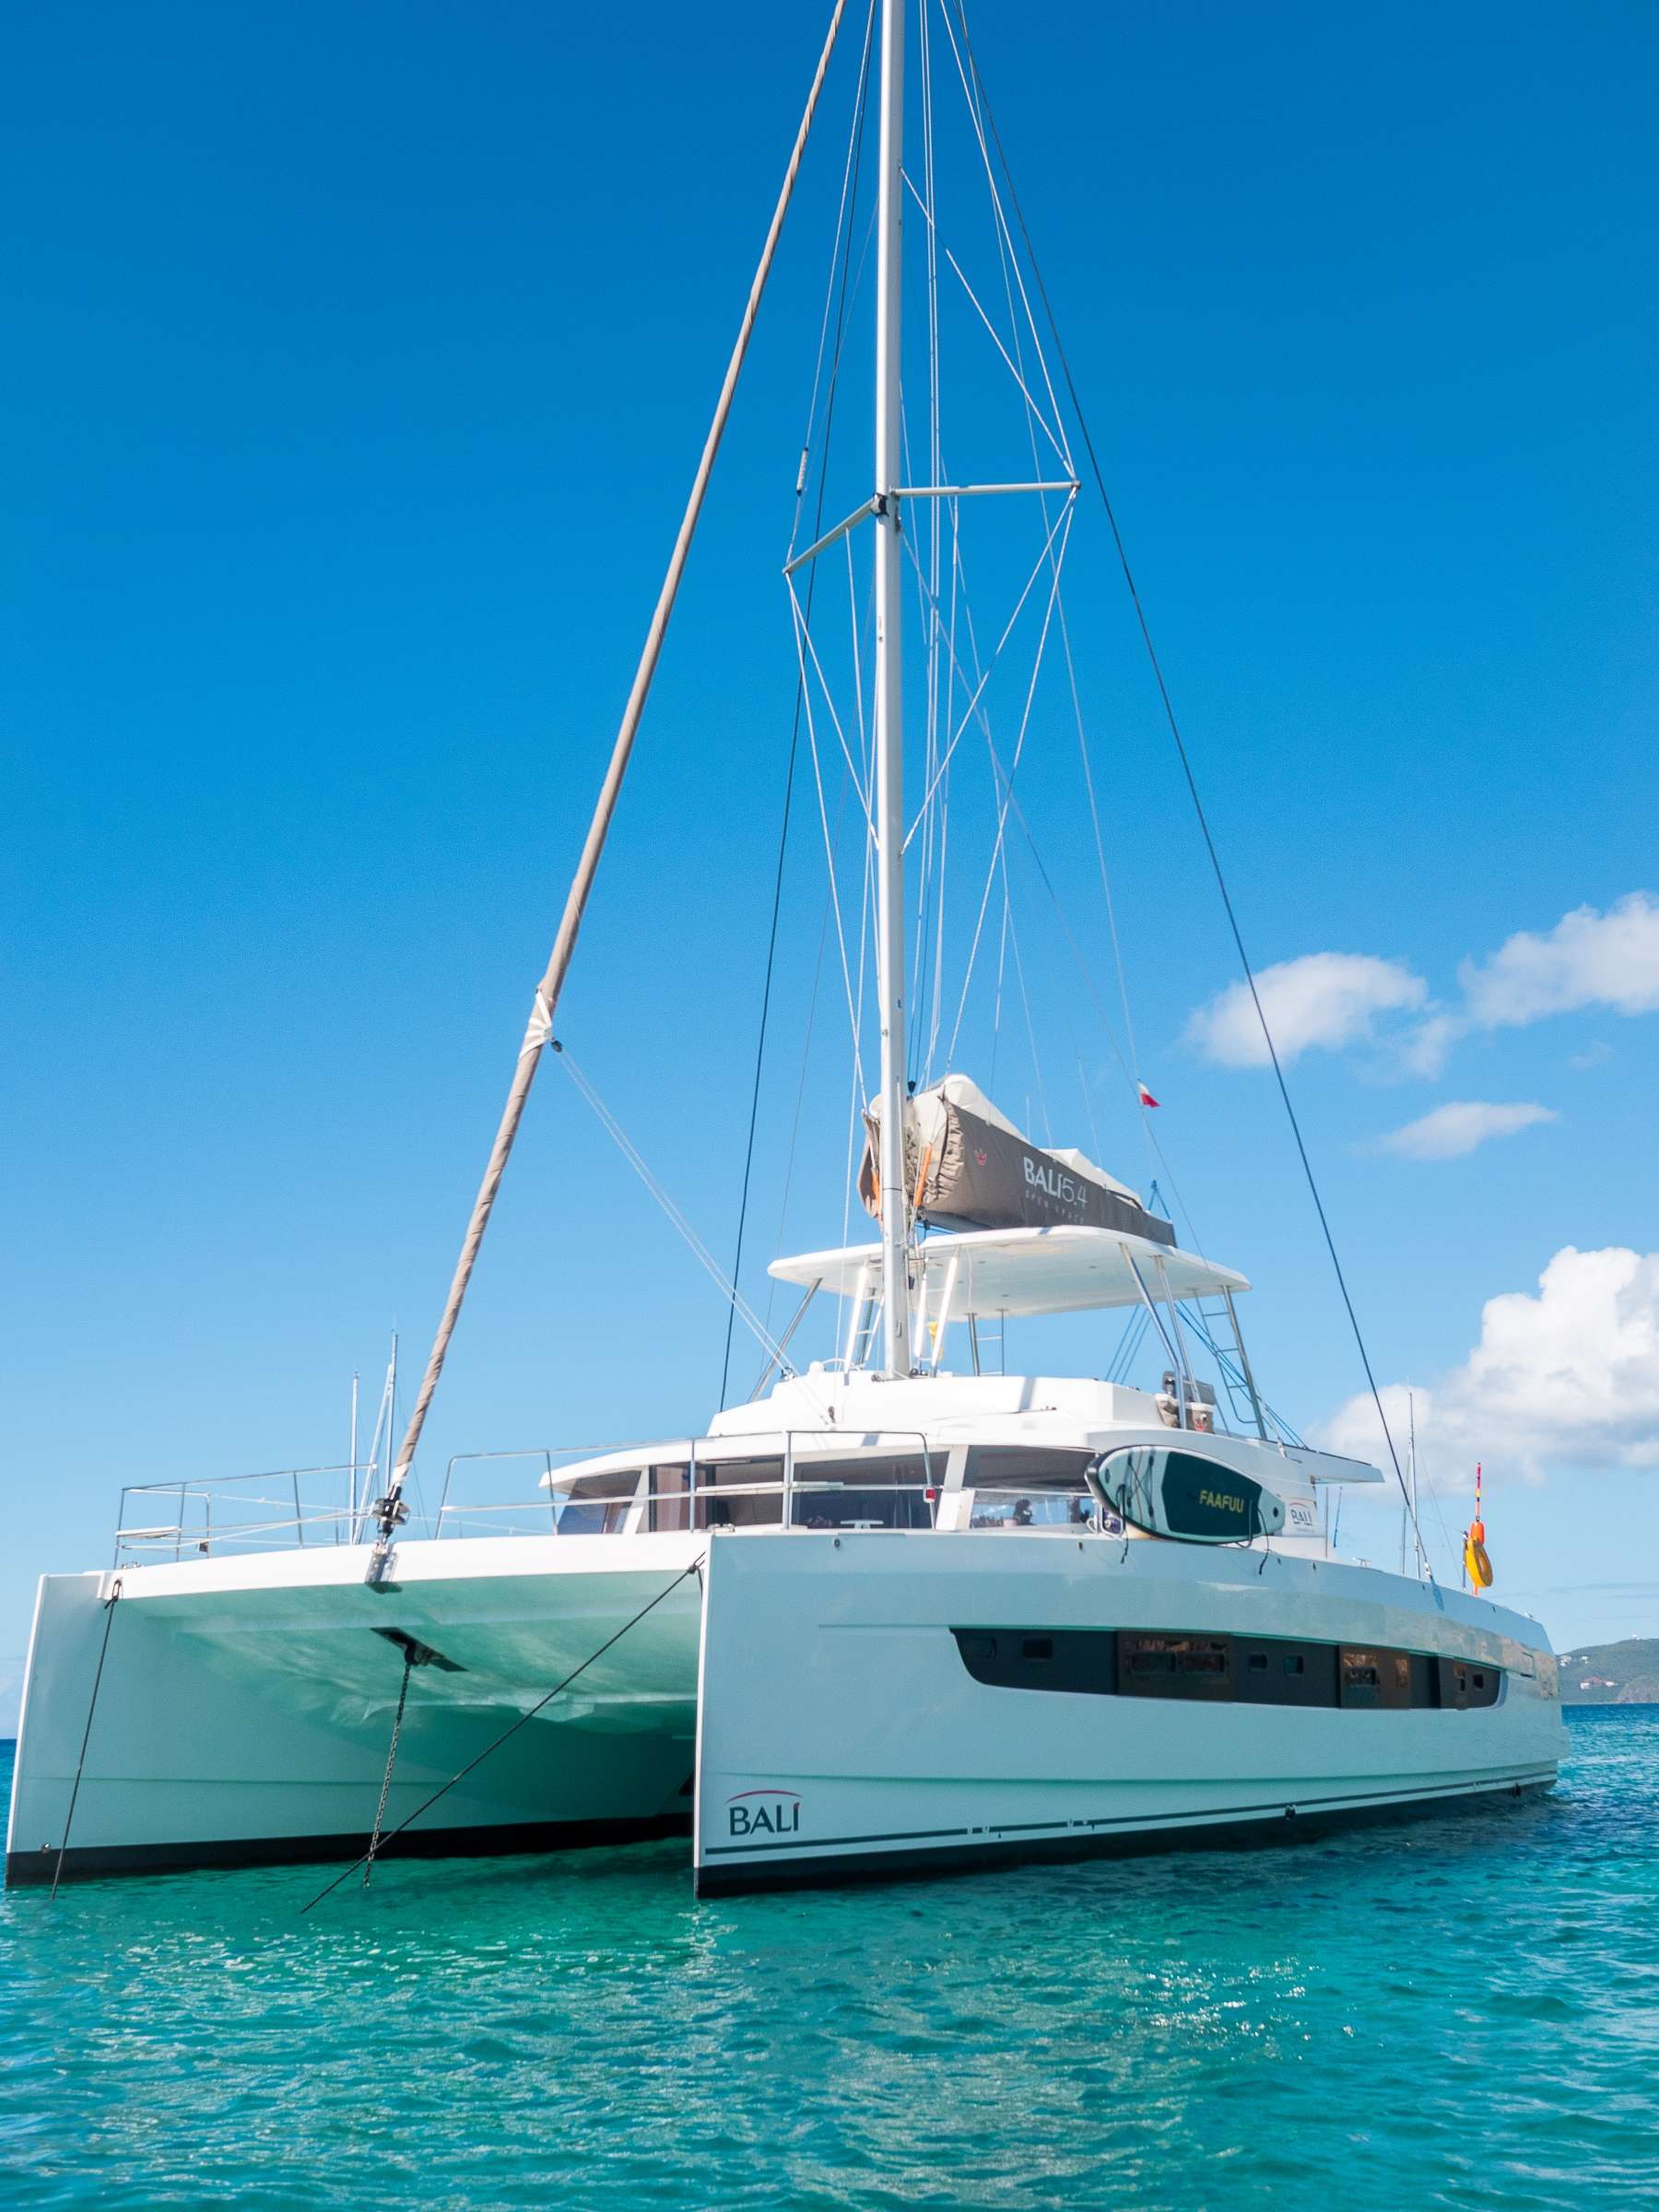 LEGASEA - Yacht Charter Guadeloupe & Boat hire in Caribbean 1